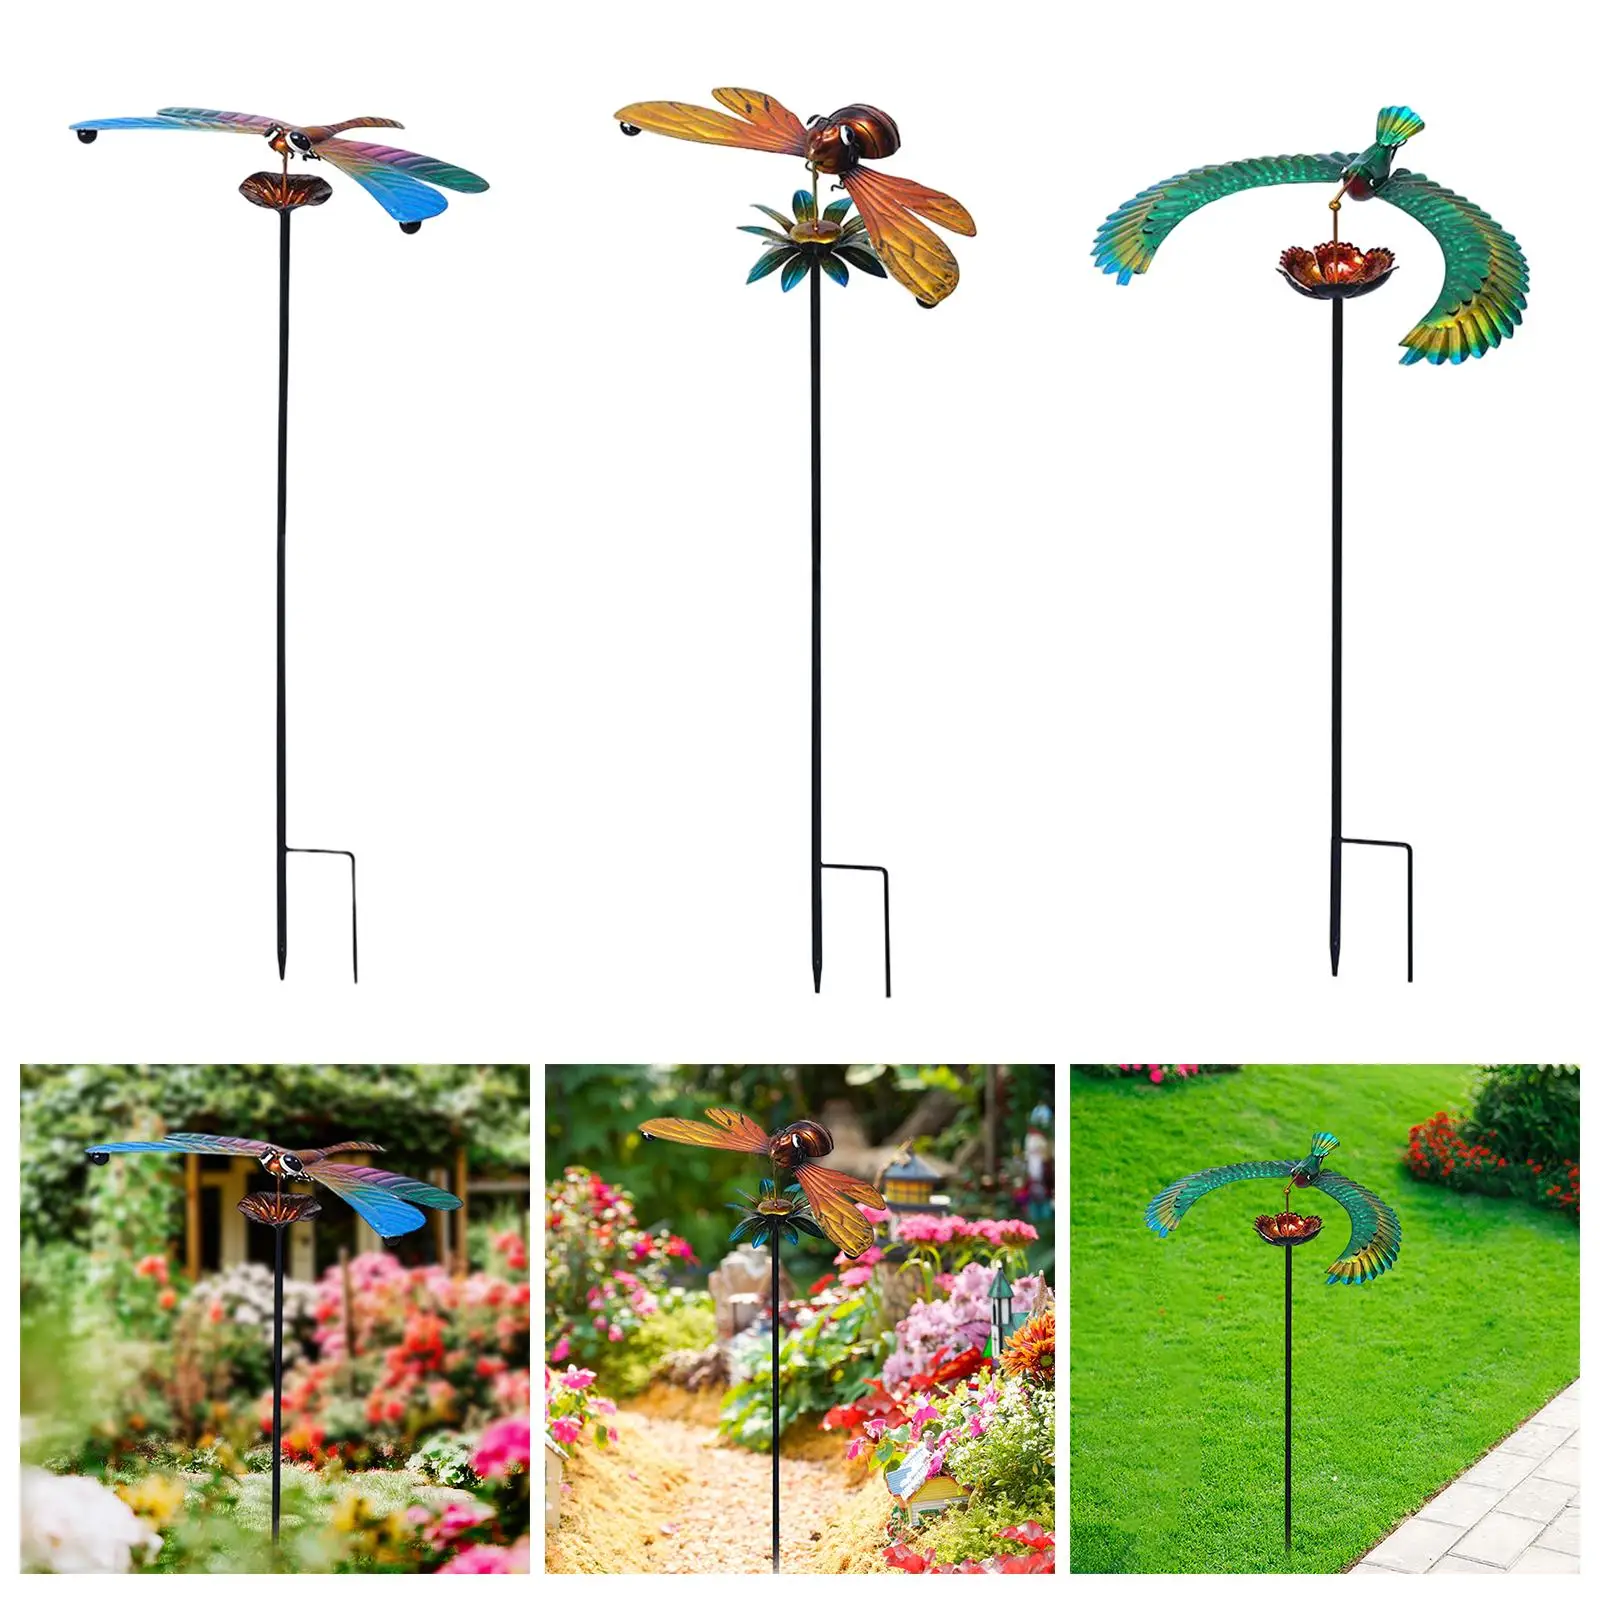 Garden Stakes Decor Sculpture Figurines Yard Ornament Metal Decoration for Patio Outdoor